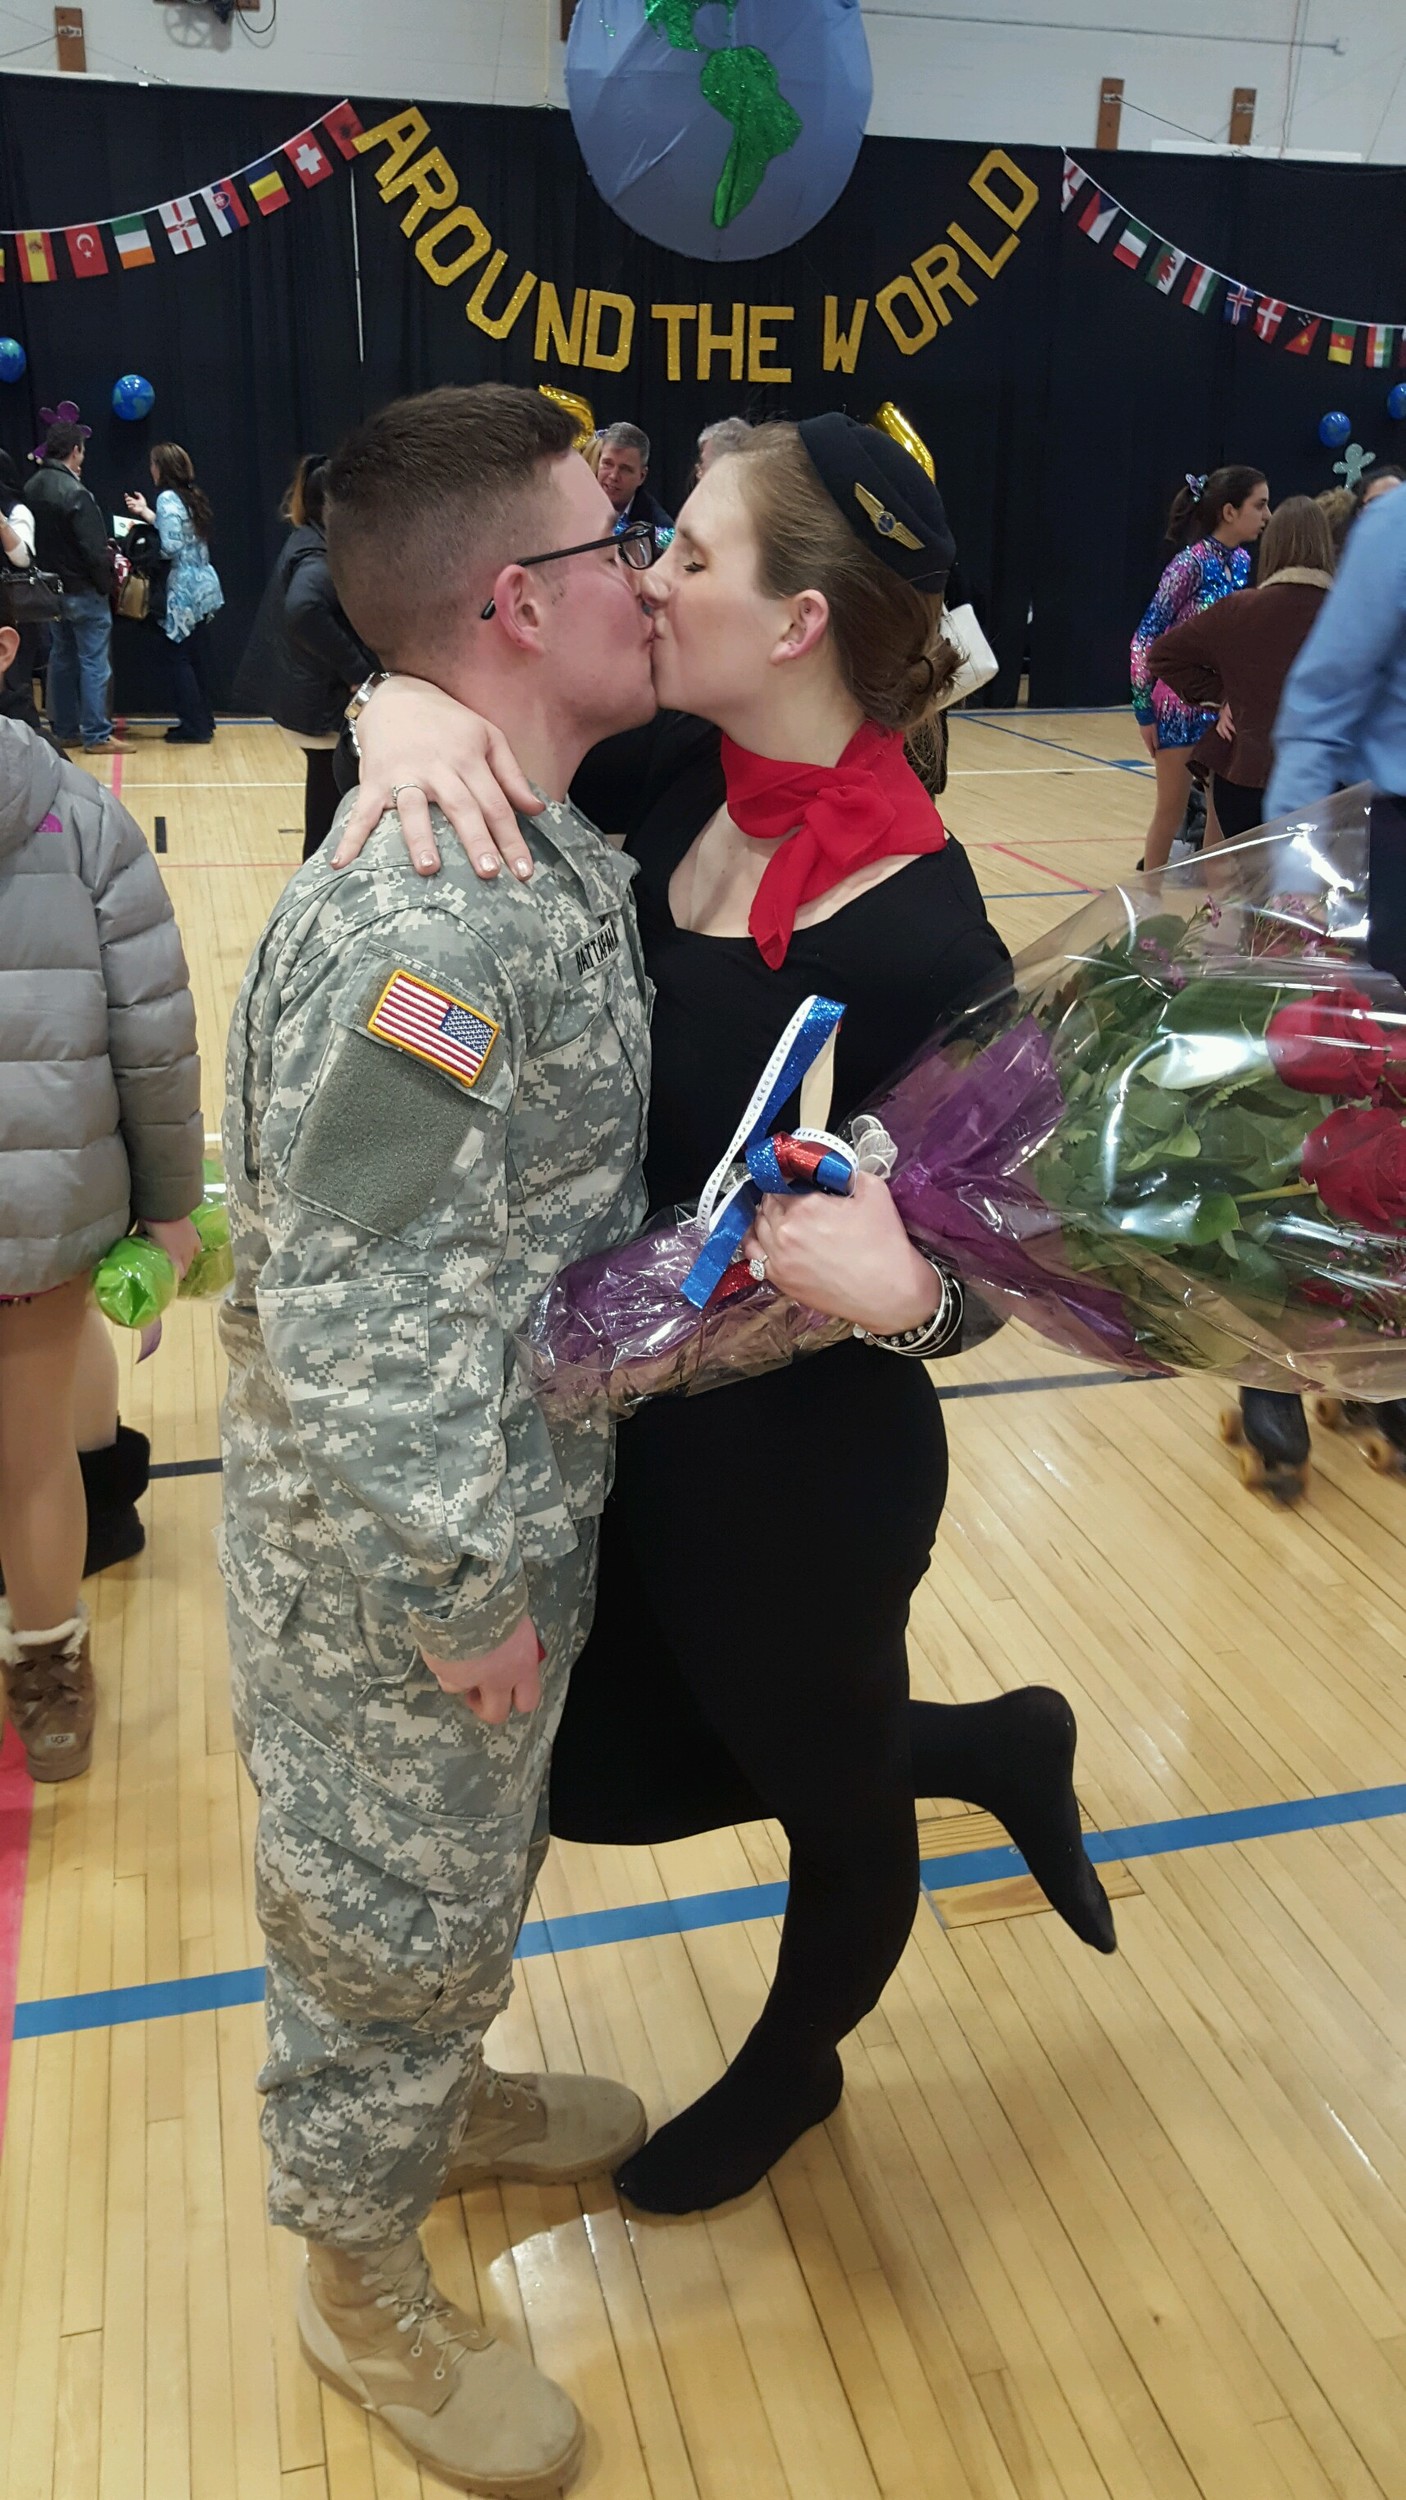 Robert Battafarano and Michelle Troici shared a kiss shortly after he proposed to her during the 54th annual Roller Skating Show at Oceanside Middle School on March 3.